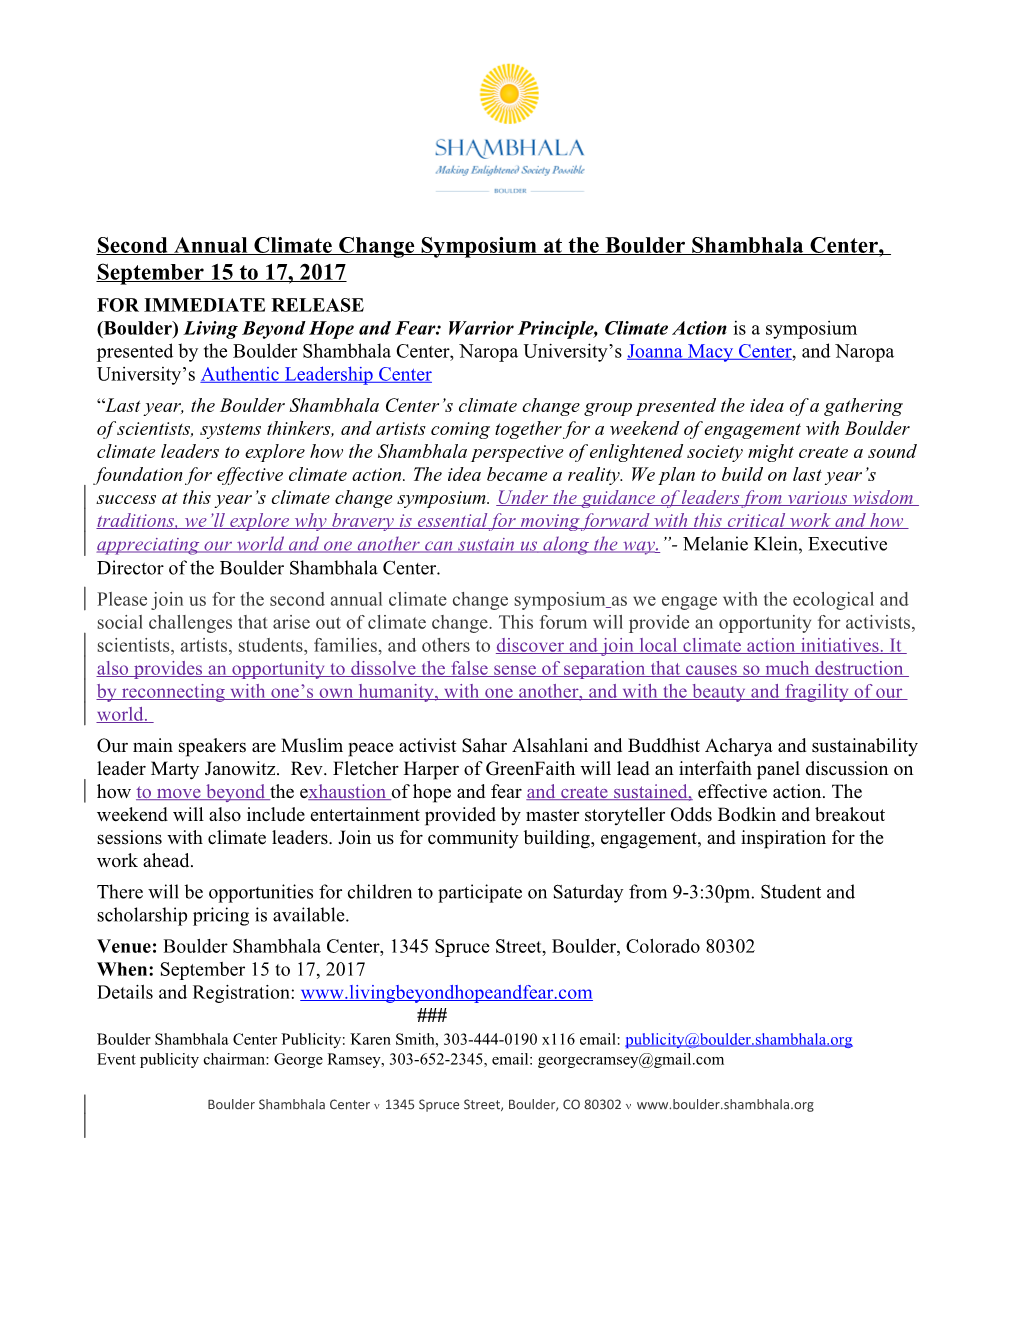 Second Annual Climate Change Symposium at the Boulder Shambhala Center, September 15 To